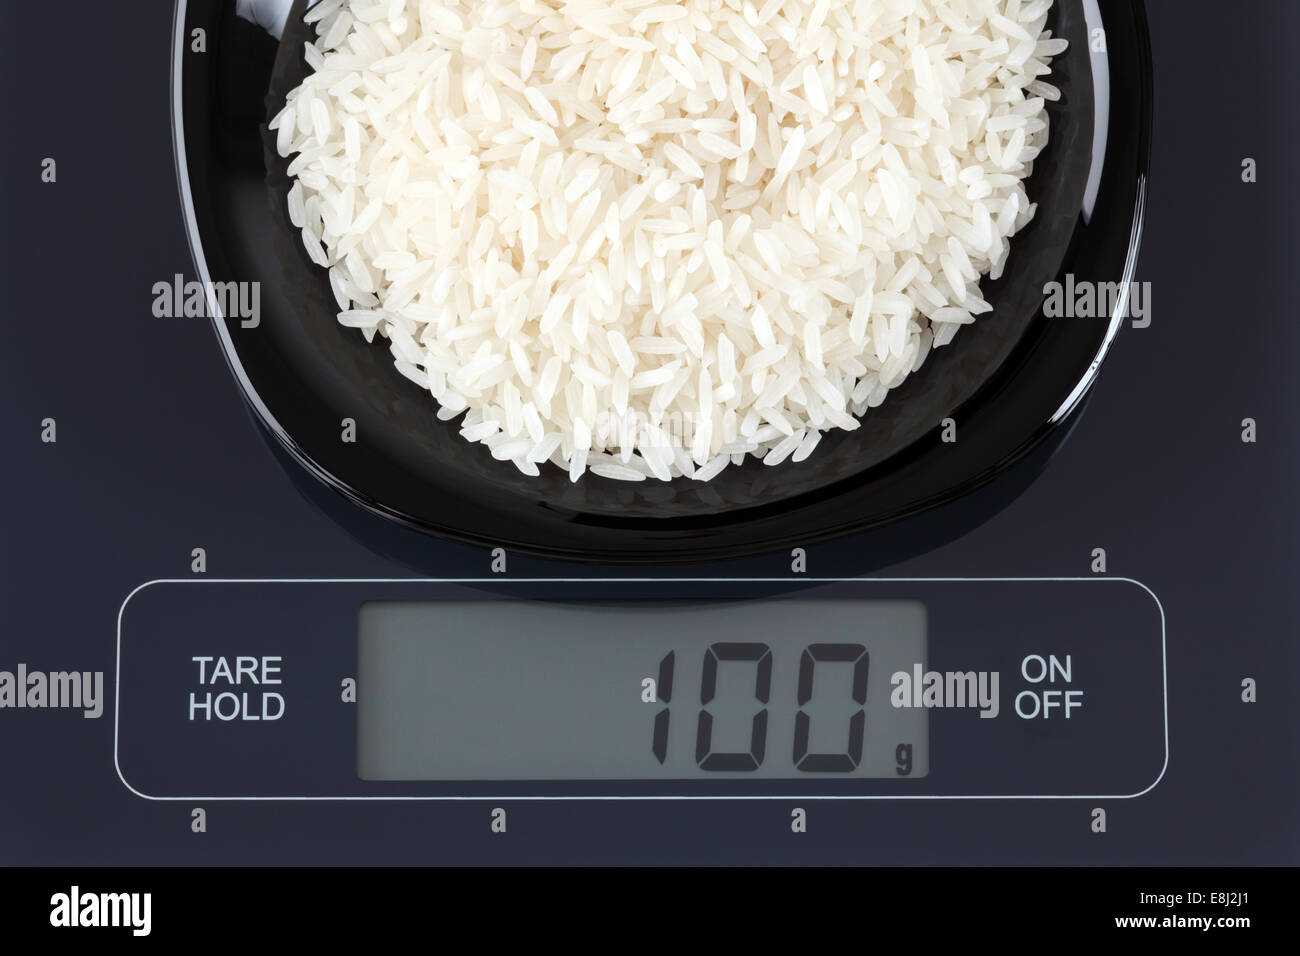 White rice in a black plate on digital scale displaying 100 gram ...